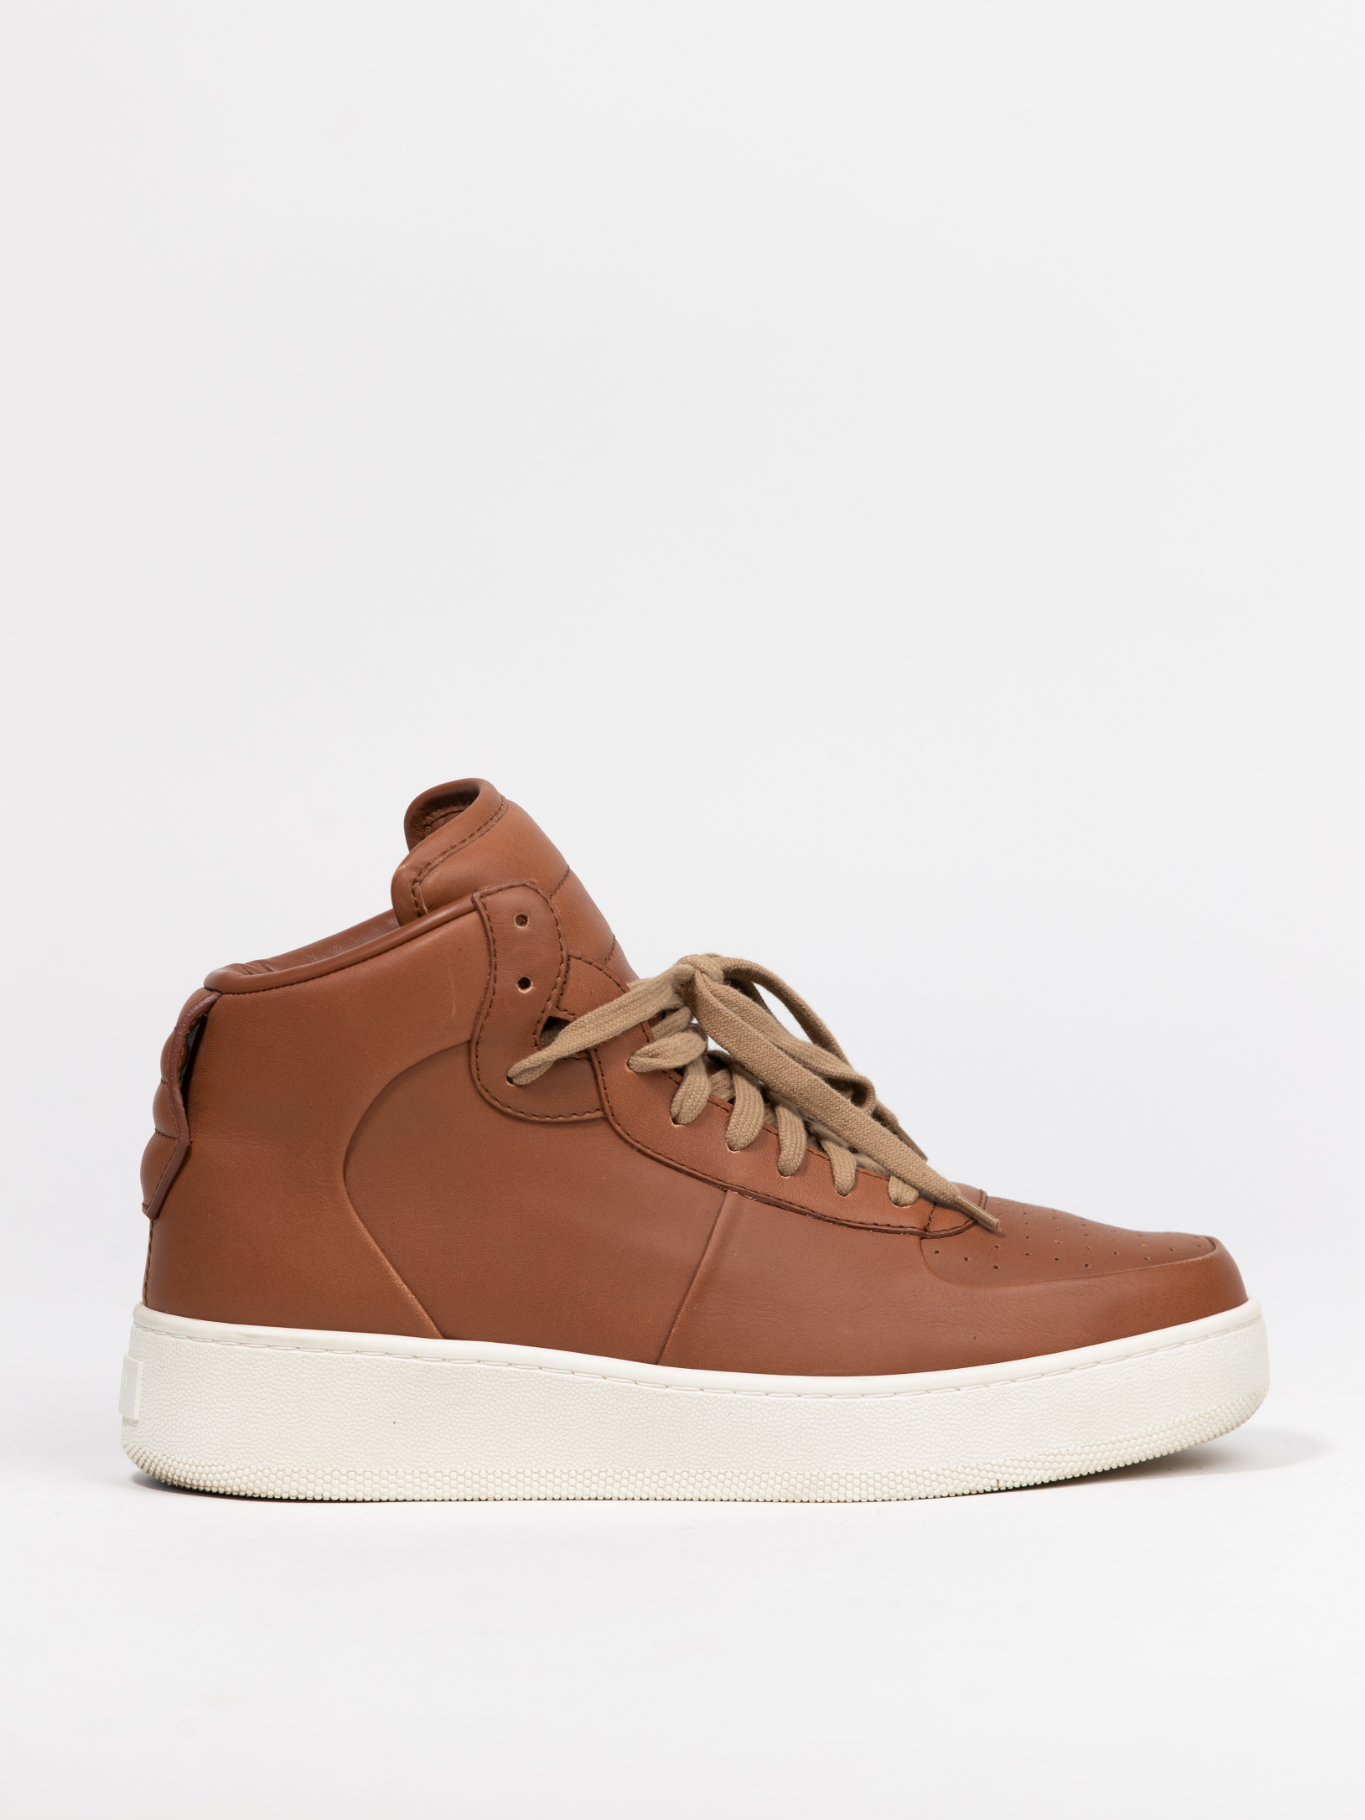 Brown Leather High Top